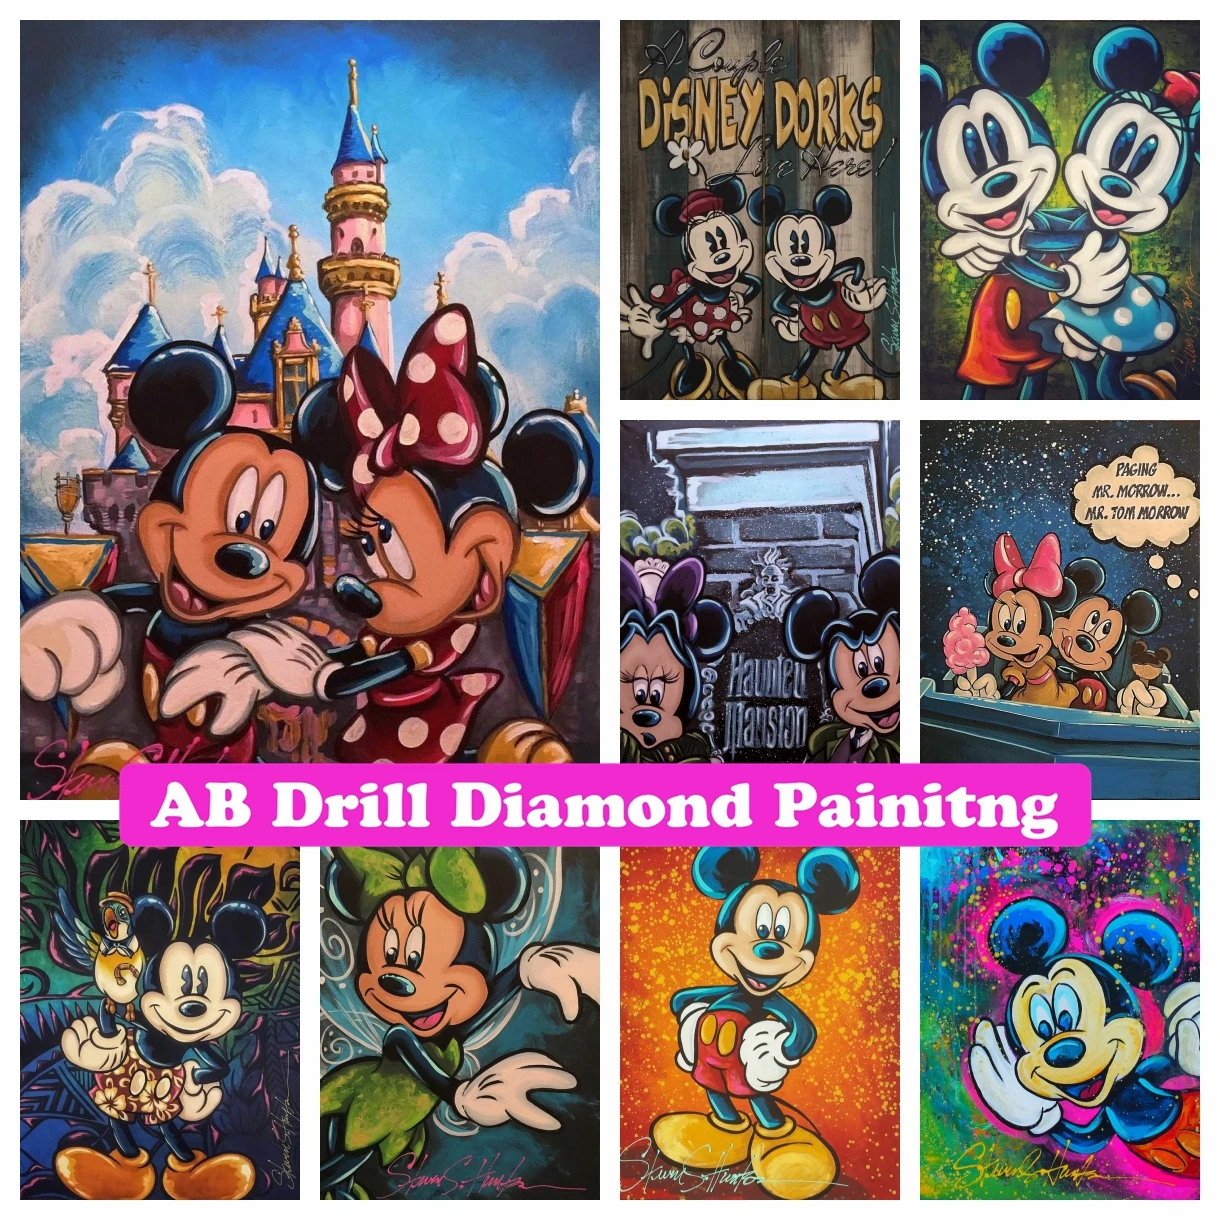 

Mickey and Minnie Mouse AB Drill Diamond Painting Disney Cartoon Pictures of Rhinestones Cross Stitch Home Decor Children's Gift